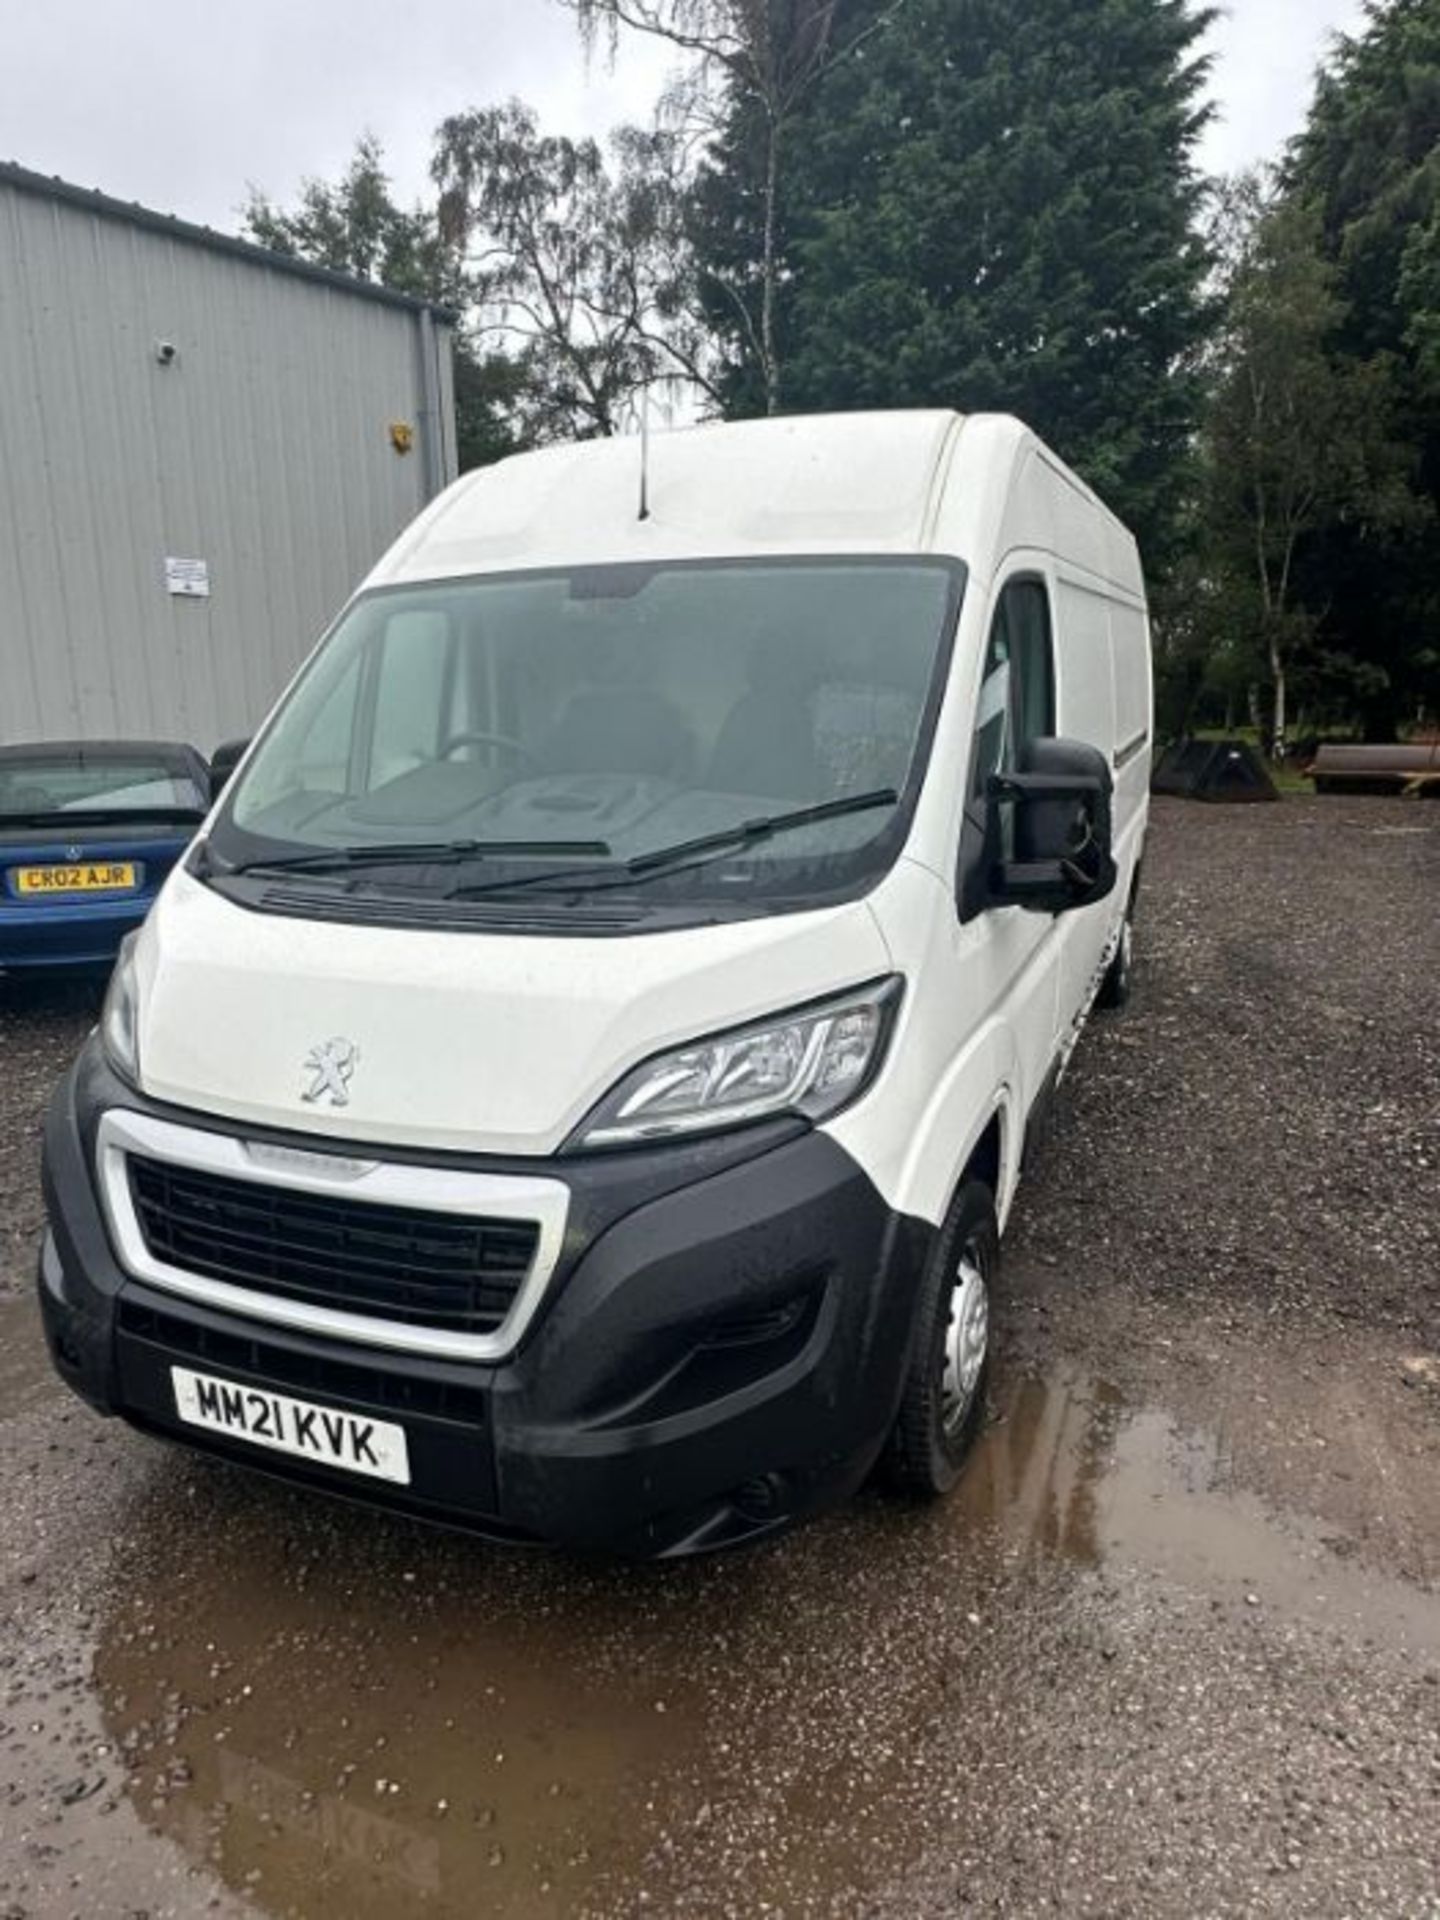 2021 21 PEUGEOT BOXER PROFESSIONAL PANEL VAN - 34K MILE - AIR CON - PLY LINED. - Image 5 of 7